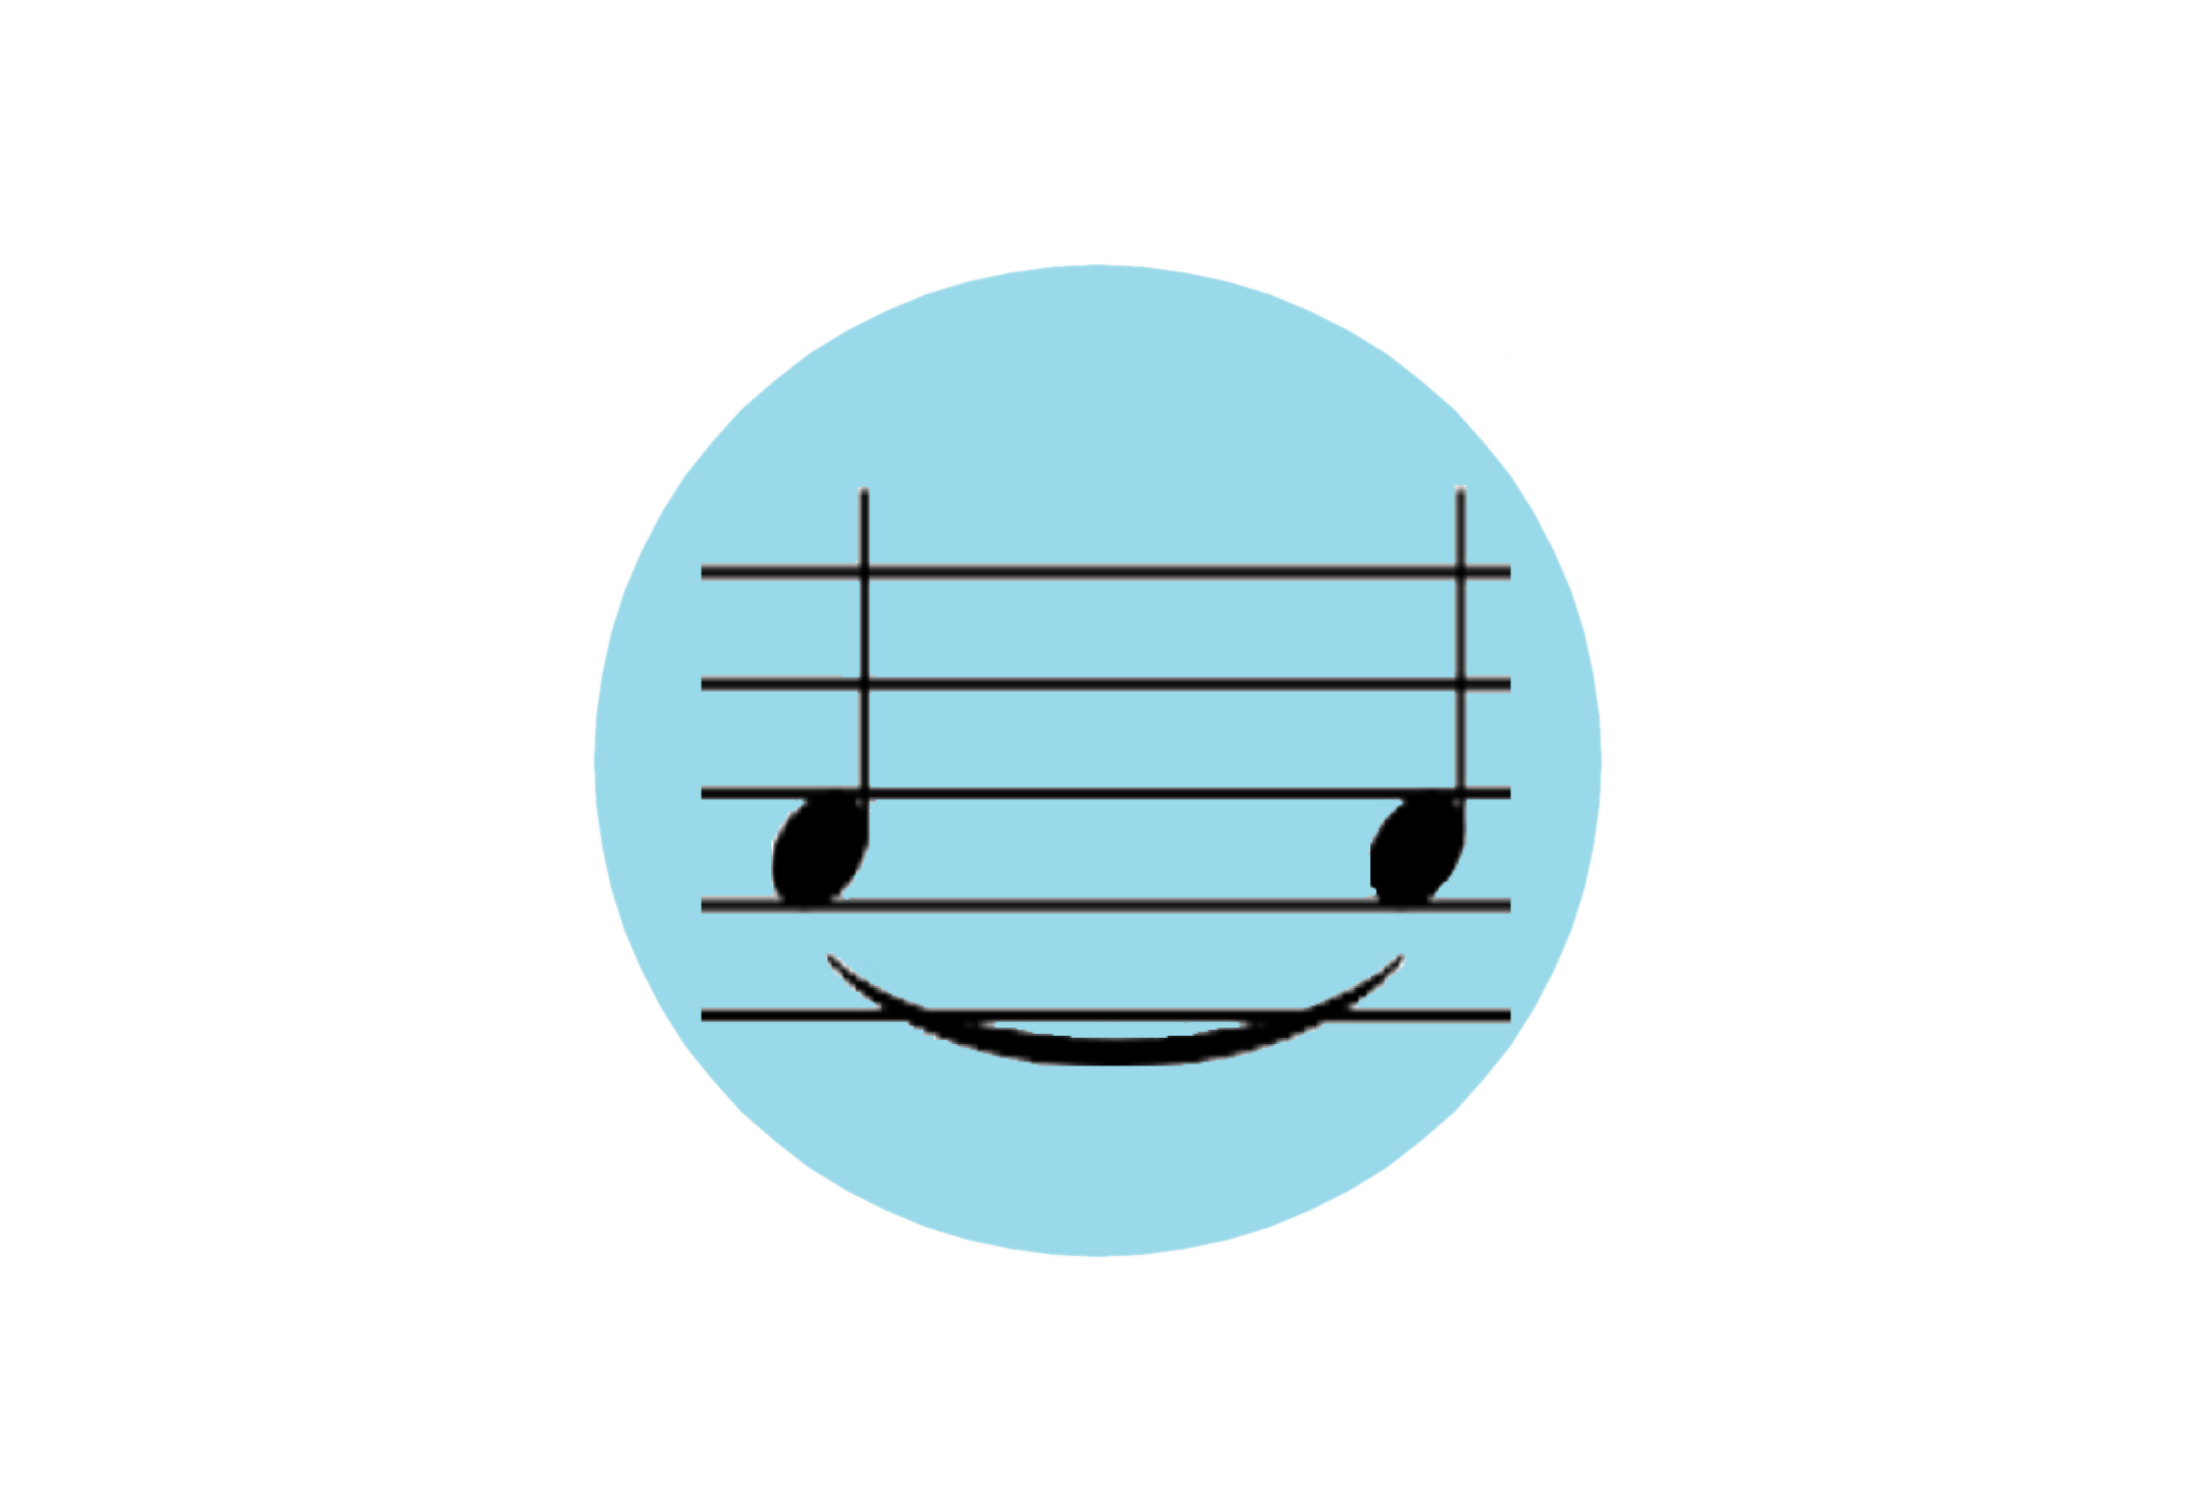 A smiley face formed using two notes and a tie